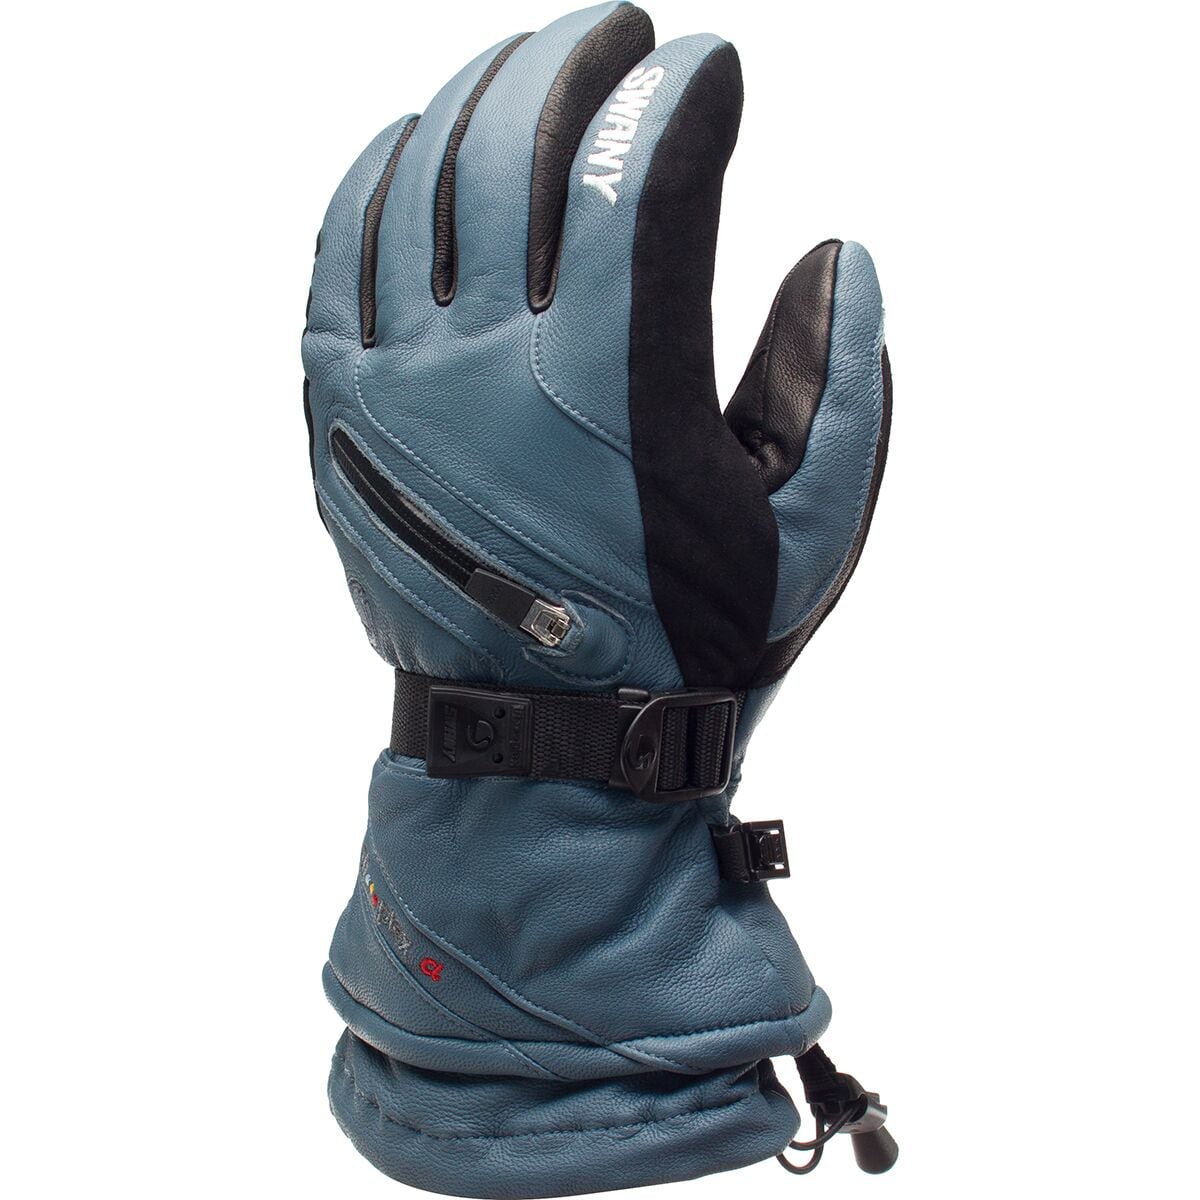 Swany X-Cell Glove - Men's Sable Blue